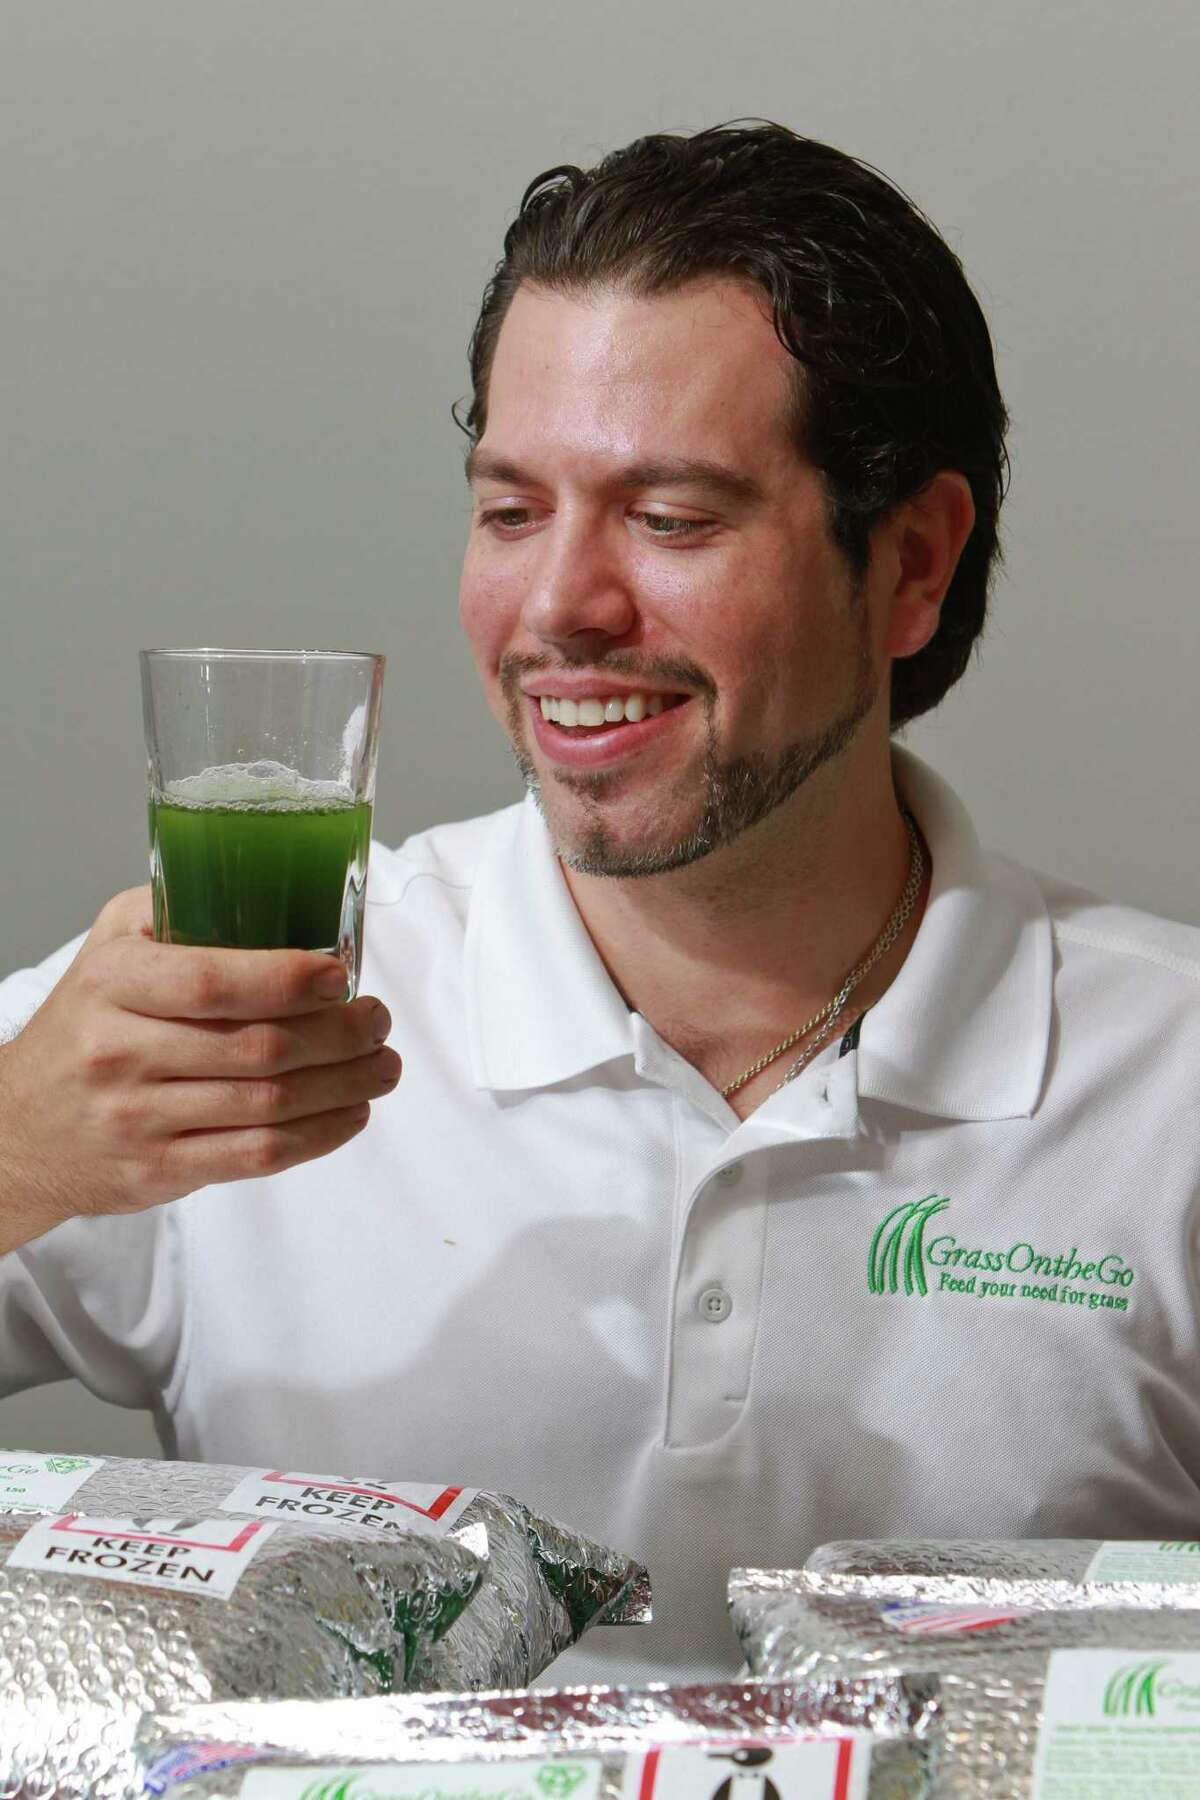 Owner and founder Alan Barrera of GrassOntheGo, with his daily shot of wheatgrass. (For the Chronicle/Gary Fountain, November 11, 2014)